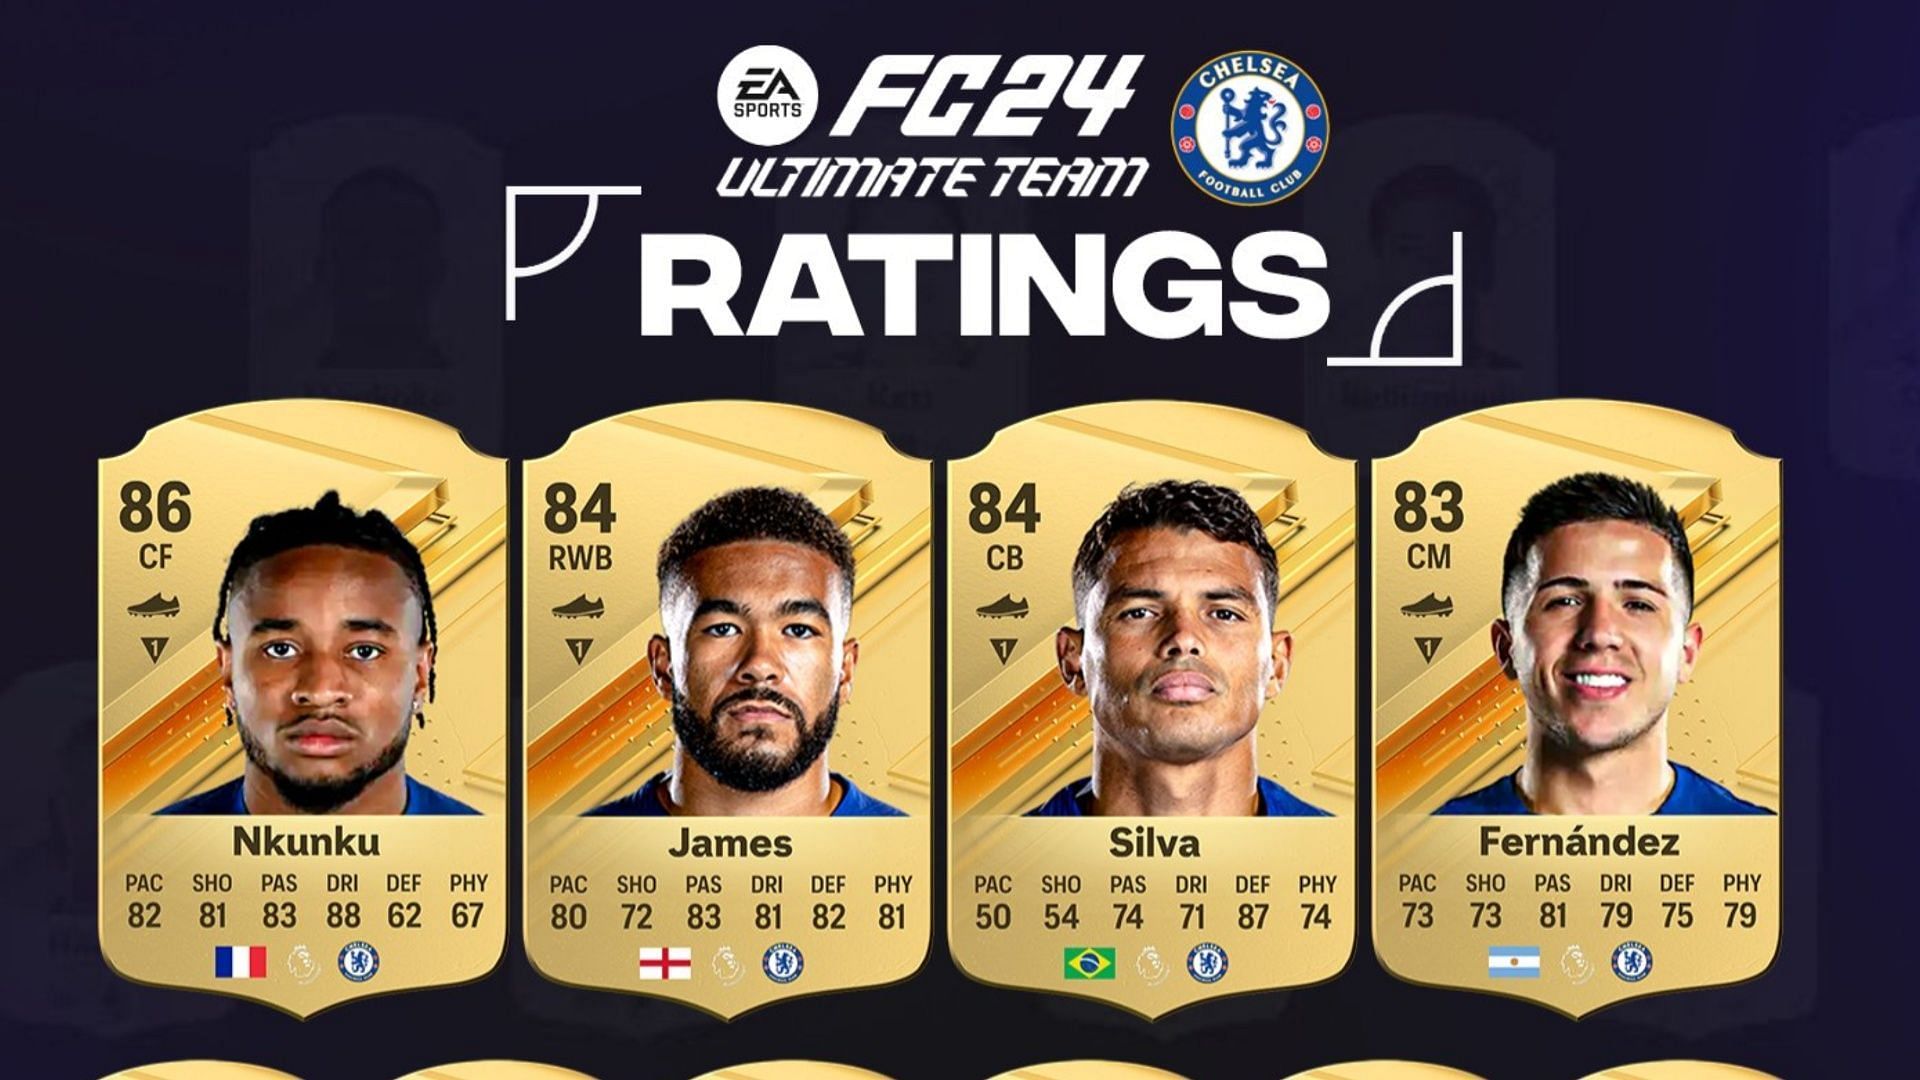 FIFA 23 Ratings - Career Mode Highest Potential - EA SPORTS Official Site